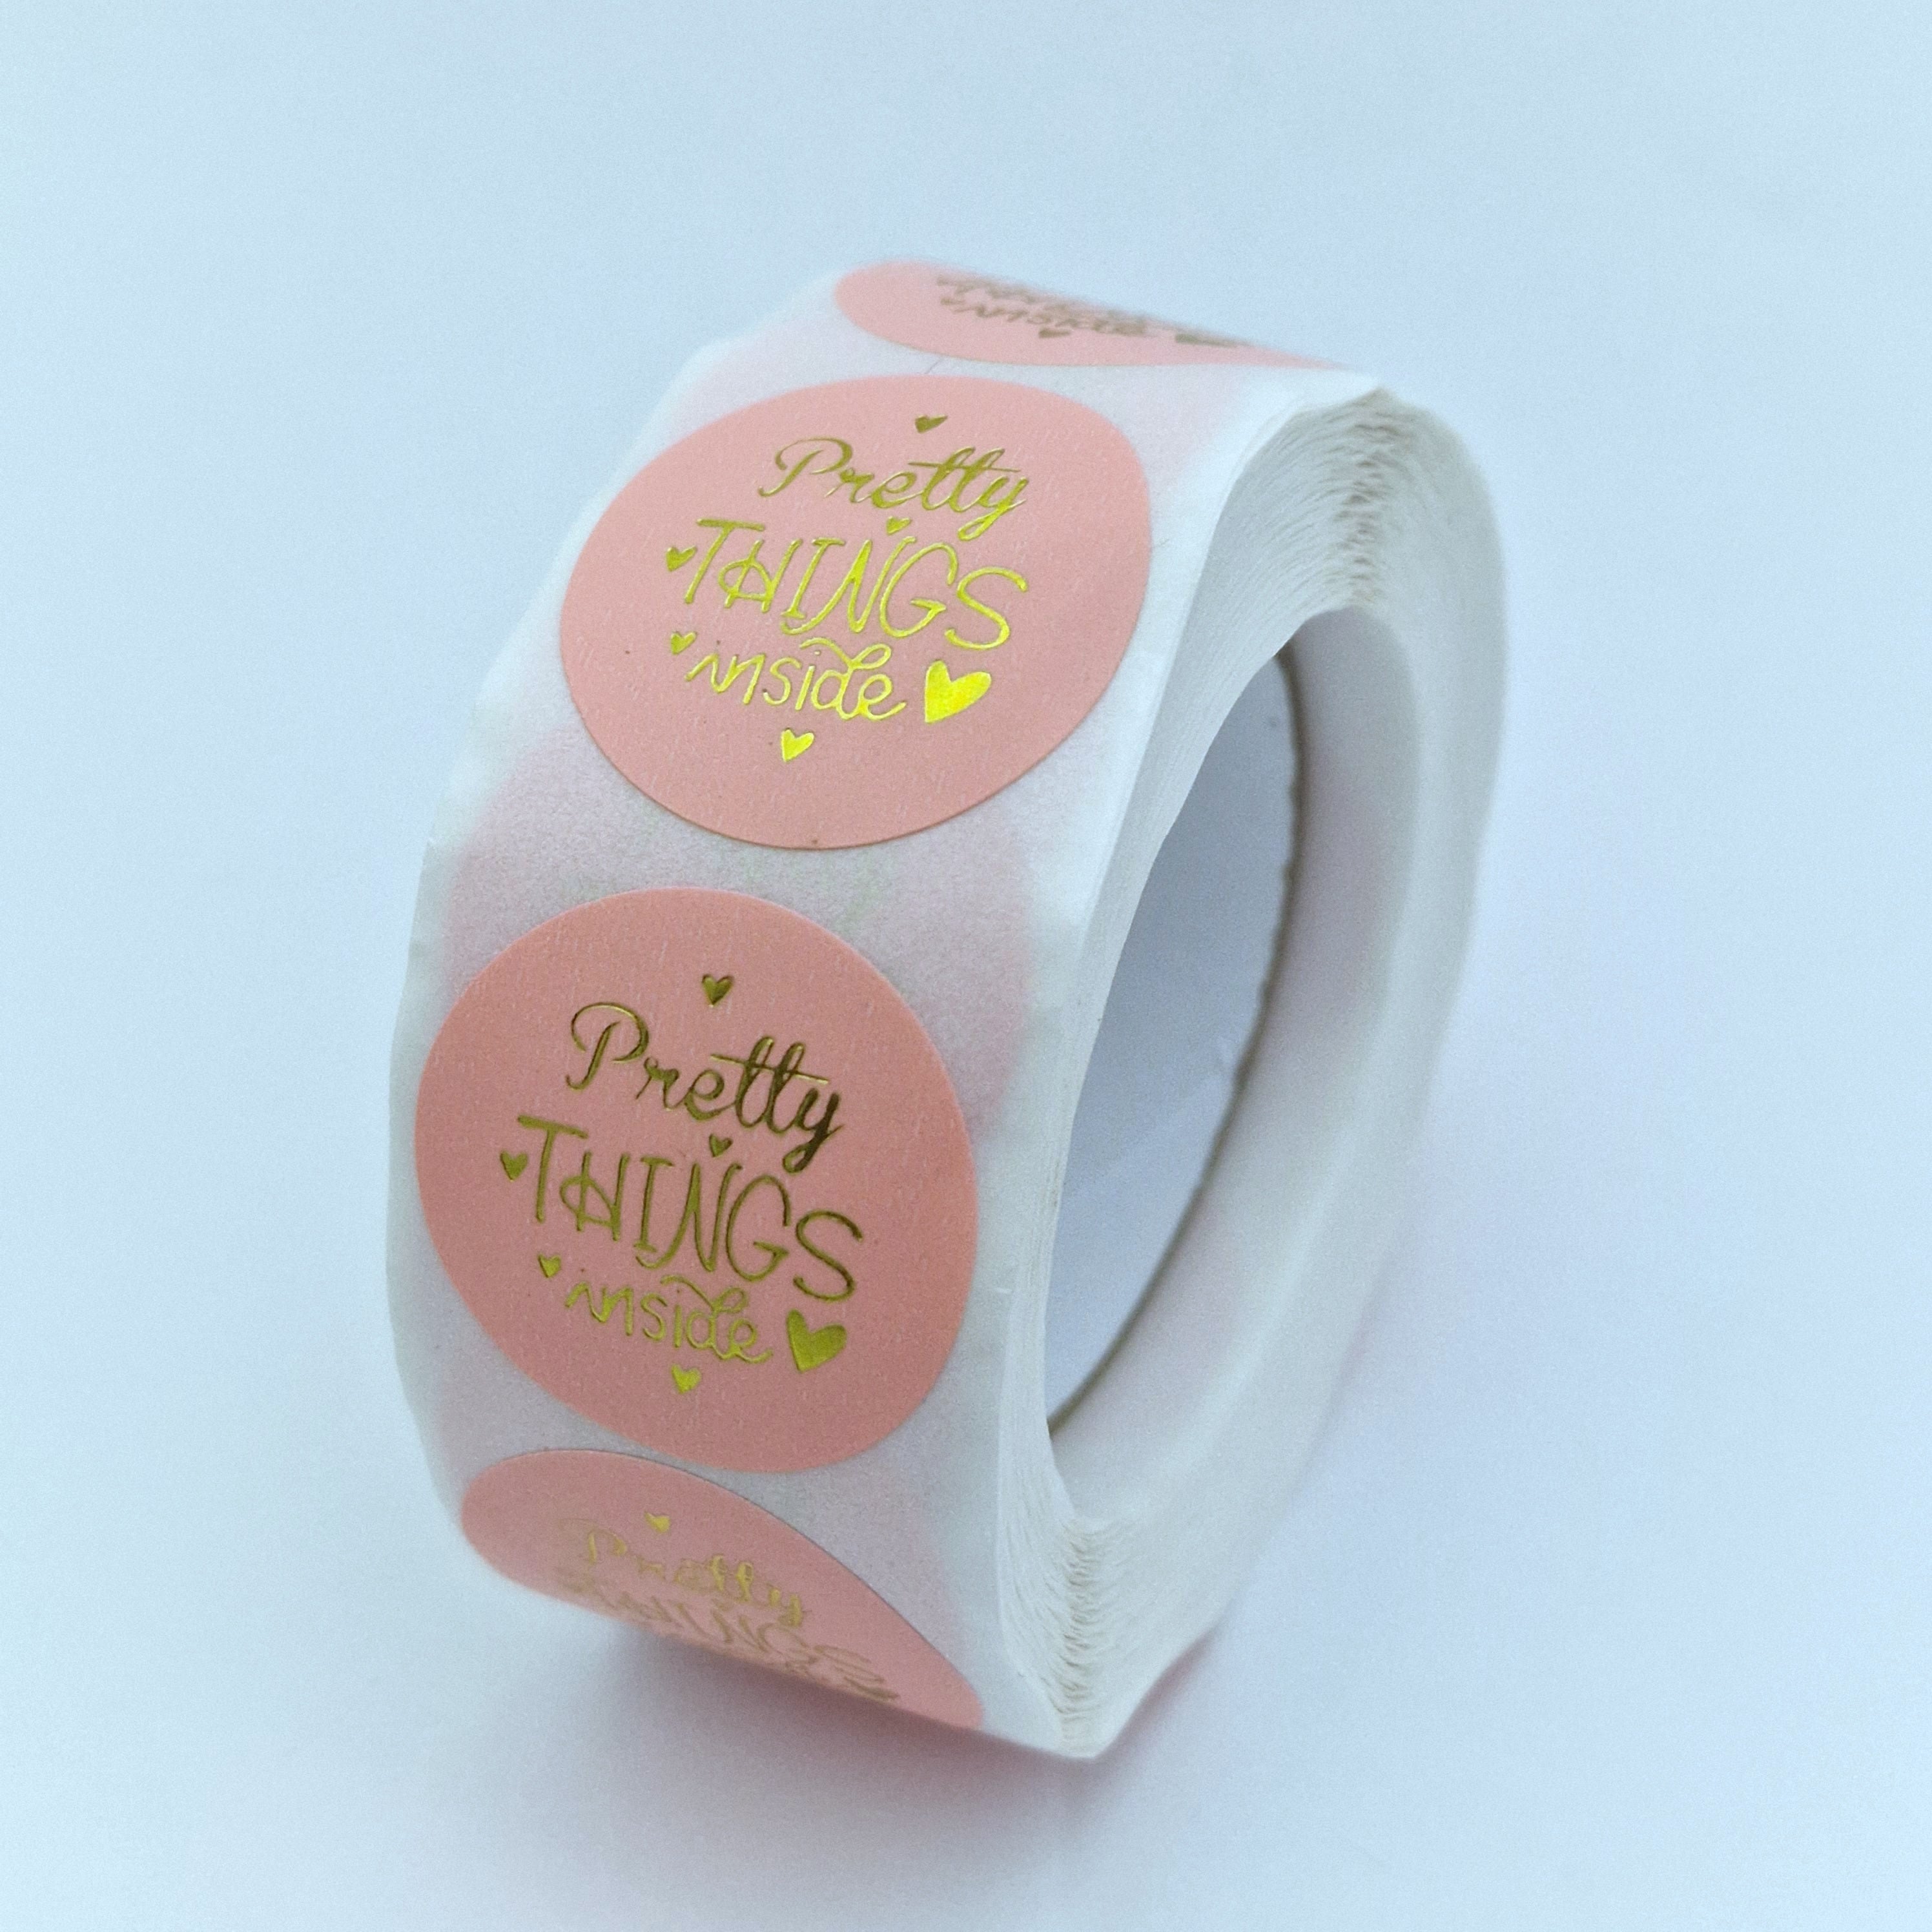 MajorCrafts 500 Labels per roll 2.5cm 1" wide Pink & Gold 'Pretty Things Inside' Printed Round Stickers V003